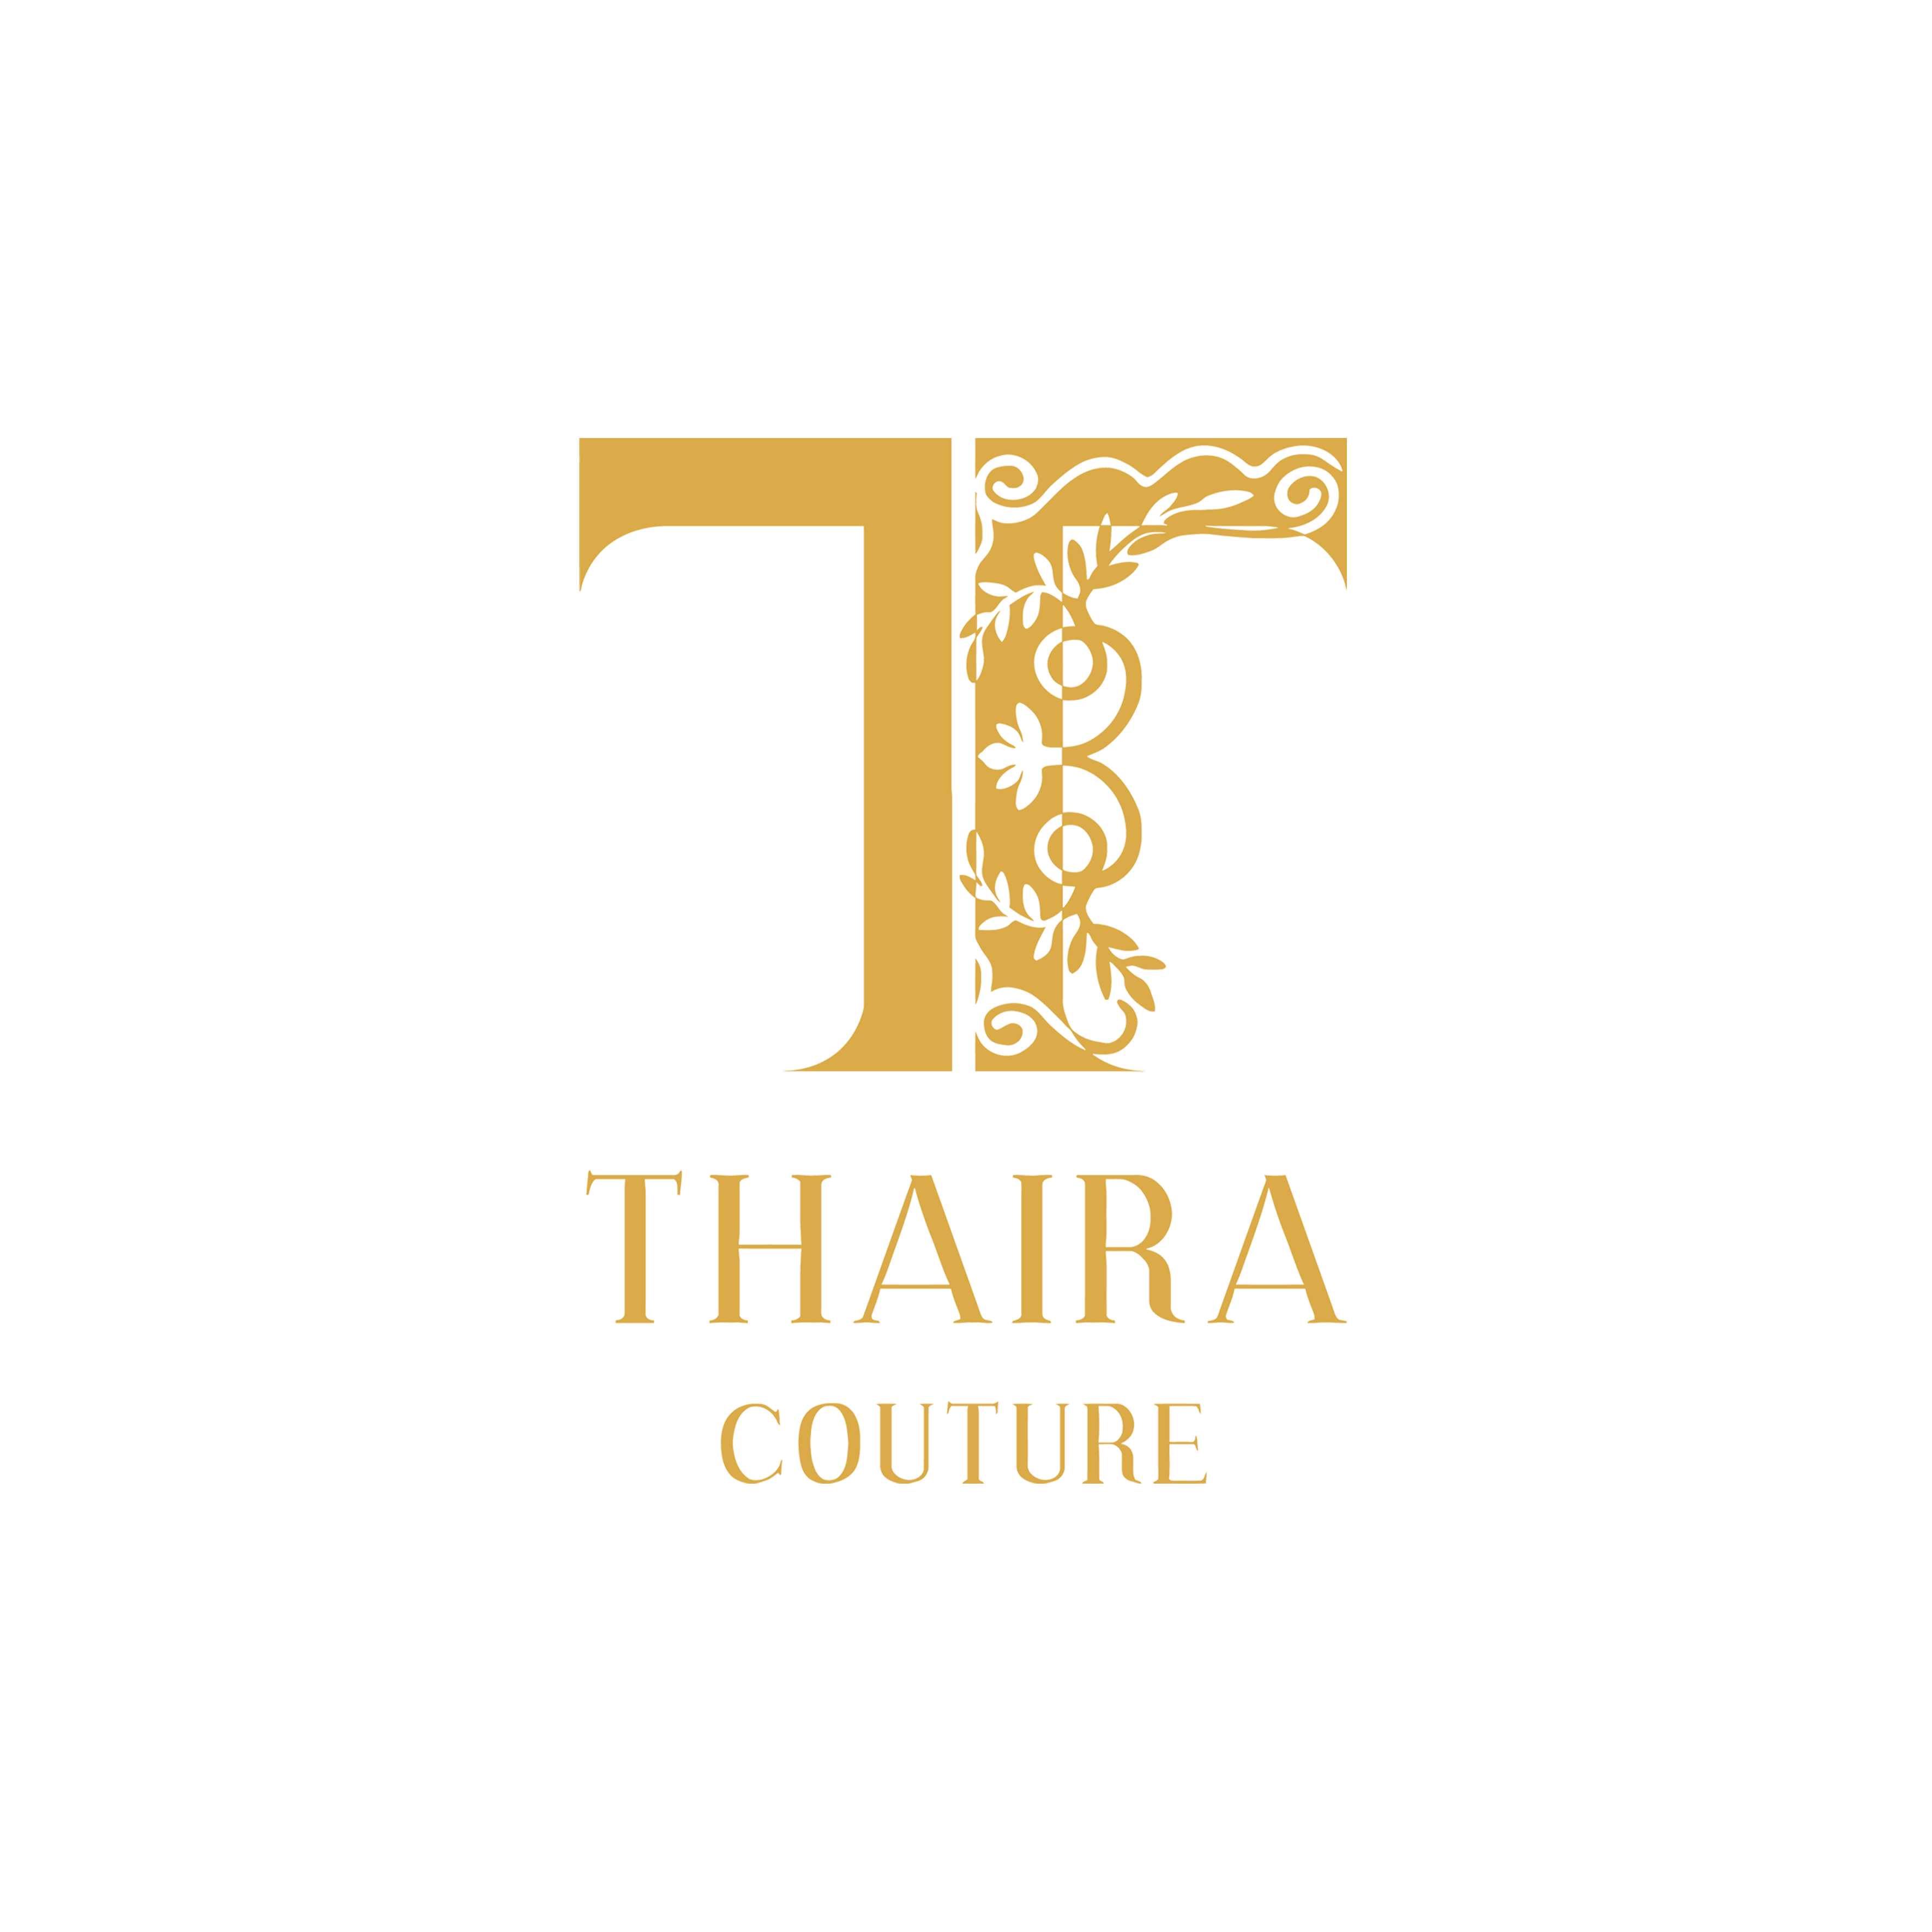 Thaira couture